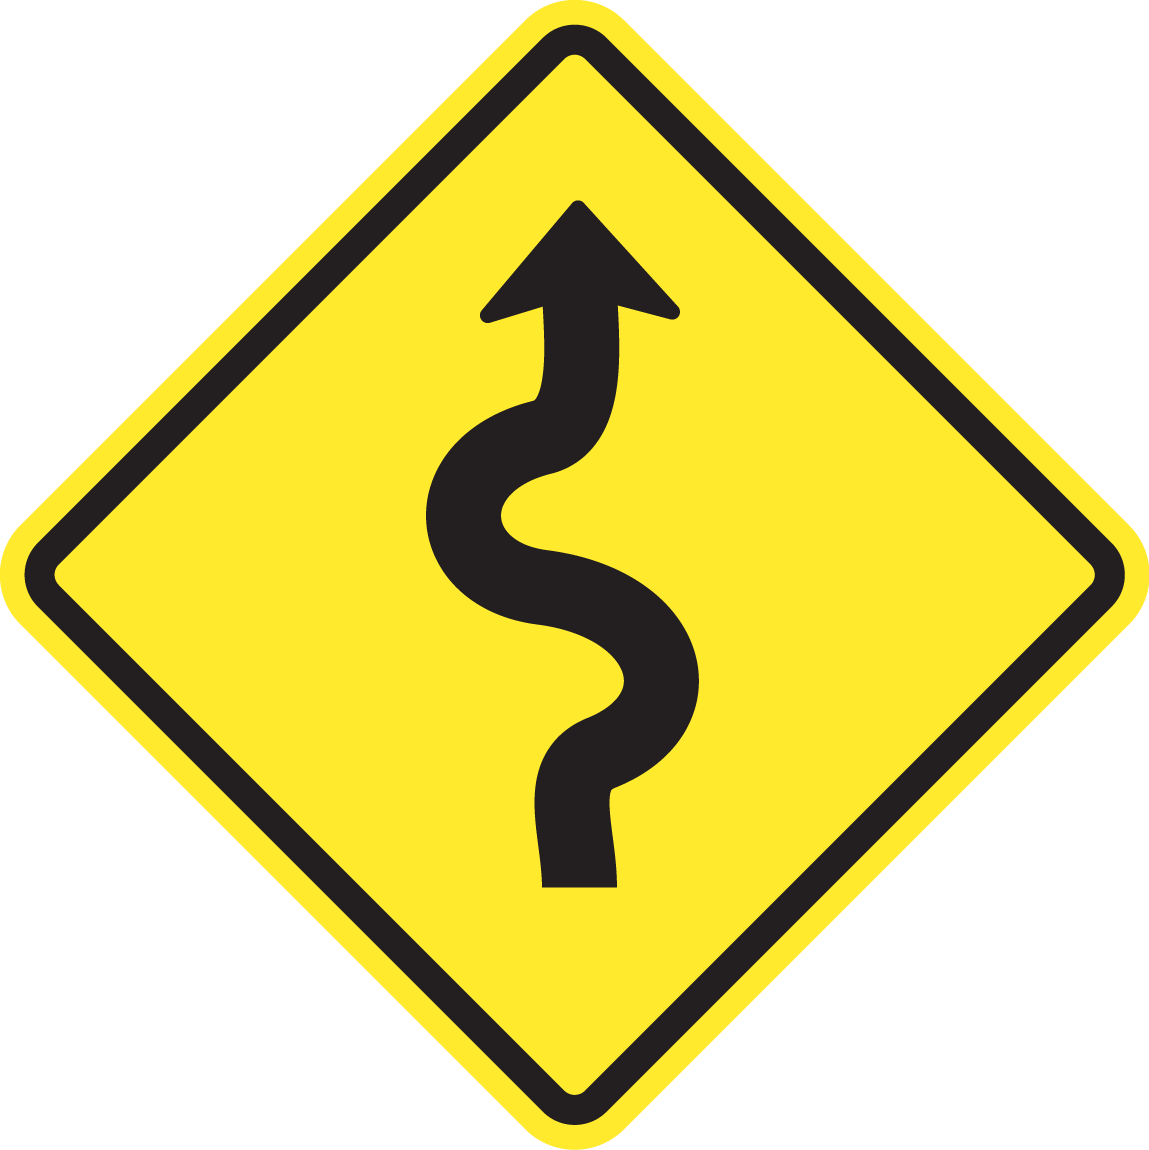 A Yellow Road Sign With A Curved Arrow